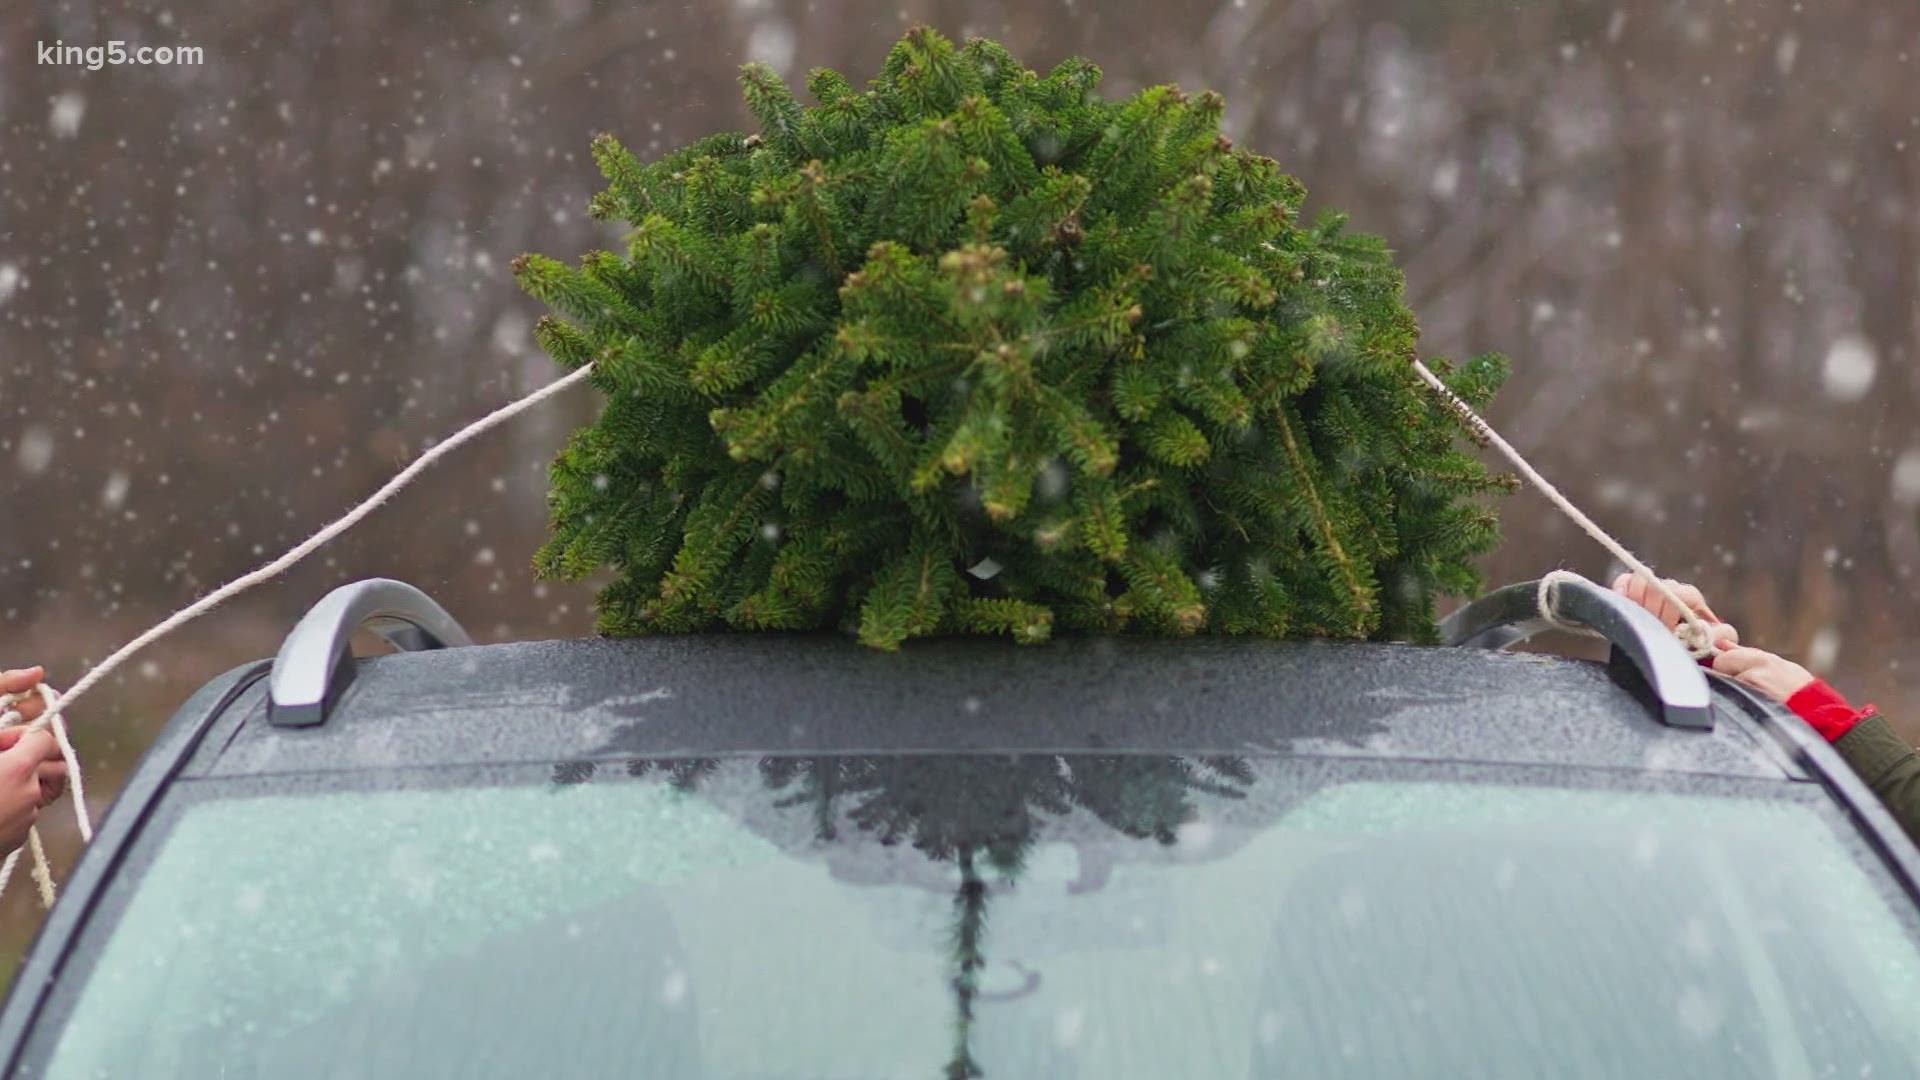 One major study by PE International found that real or fake, Christmas trees account for less than 0.1% of the average person’s annual carbon footprint.